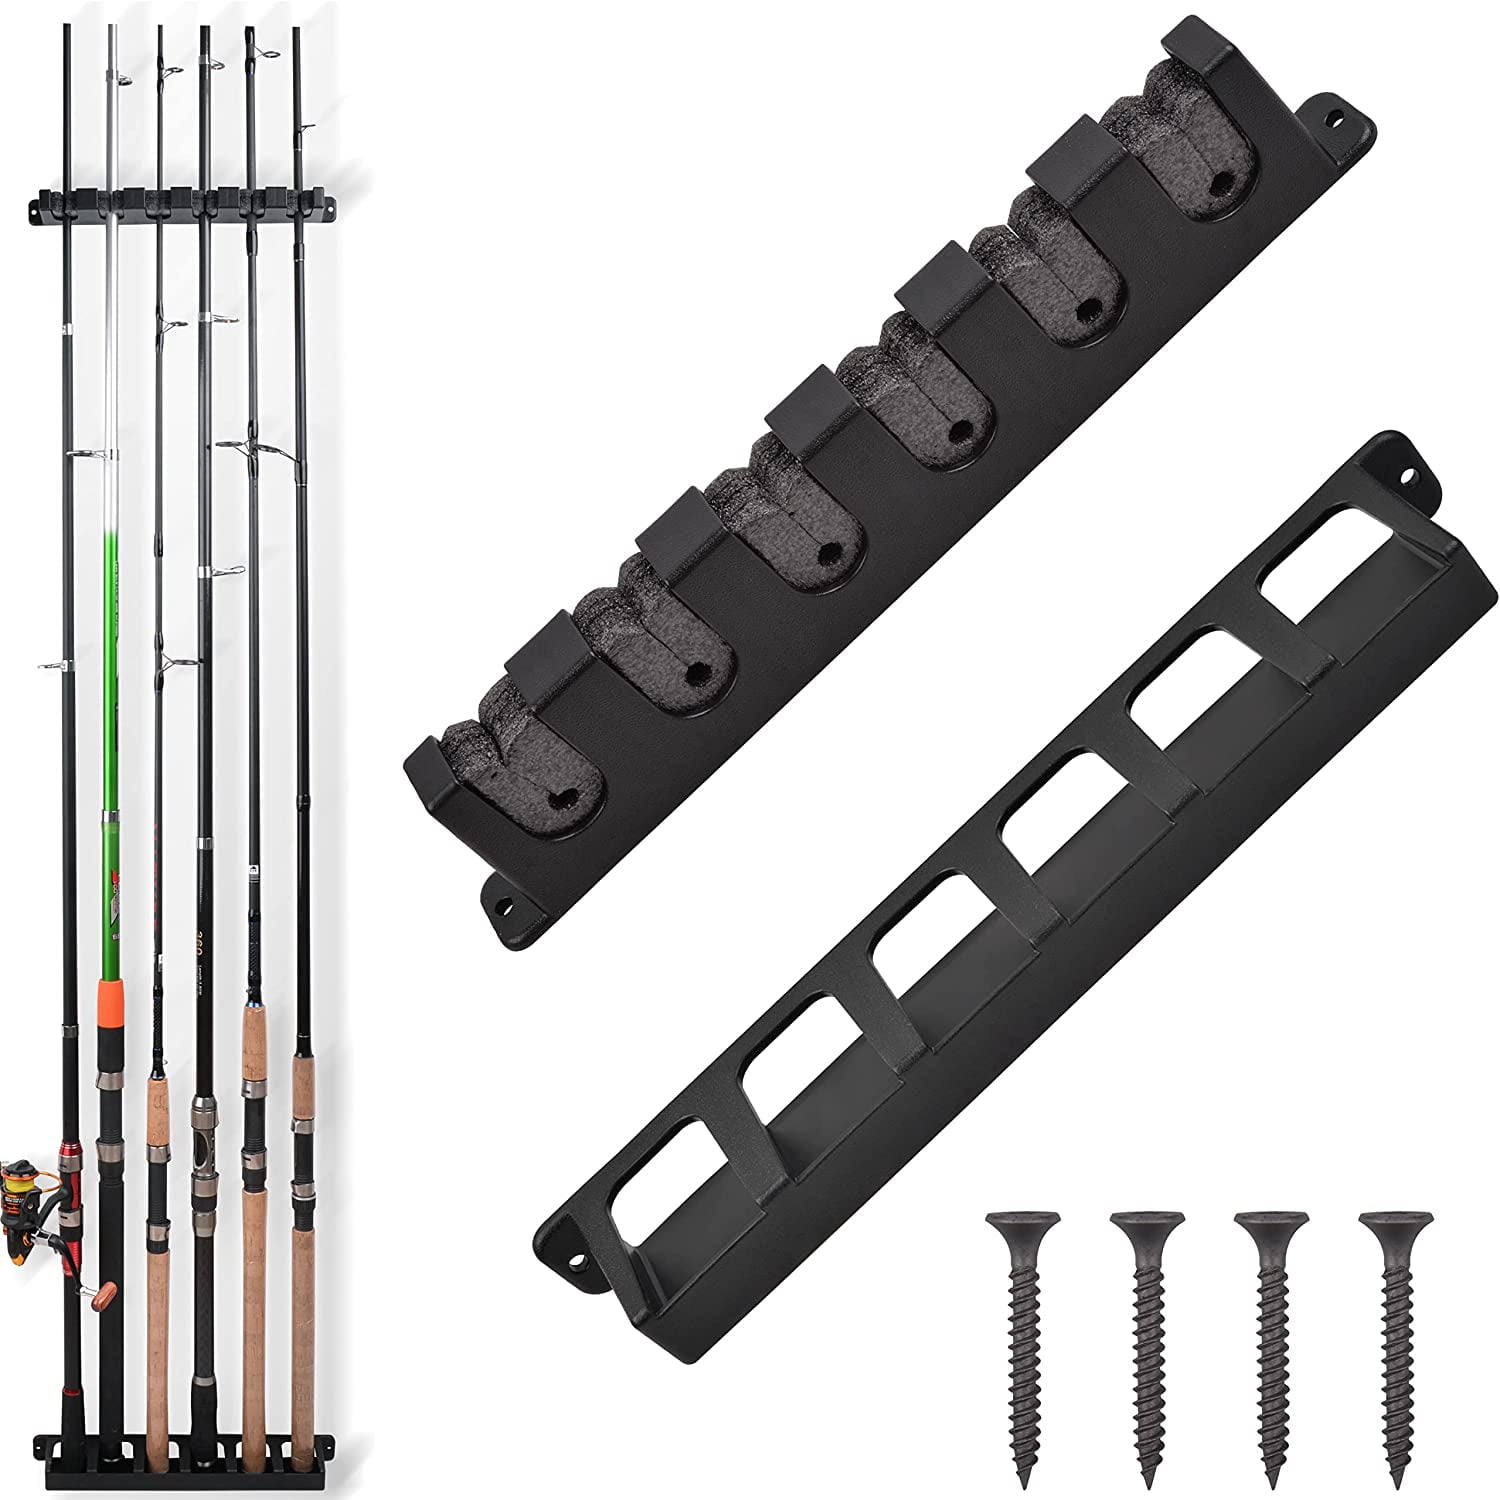 PLUSINNO V9 Vertical Fishing Rod Holders, 4 Packs Wall Mounted Fishing Pole  Holders, Fishing Rod Racks Hold Up to 36 Rods or Combos, Fishing Rod  Holders for Garage, Fits Most Rods of